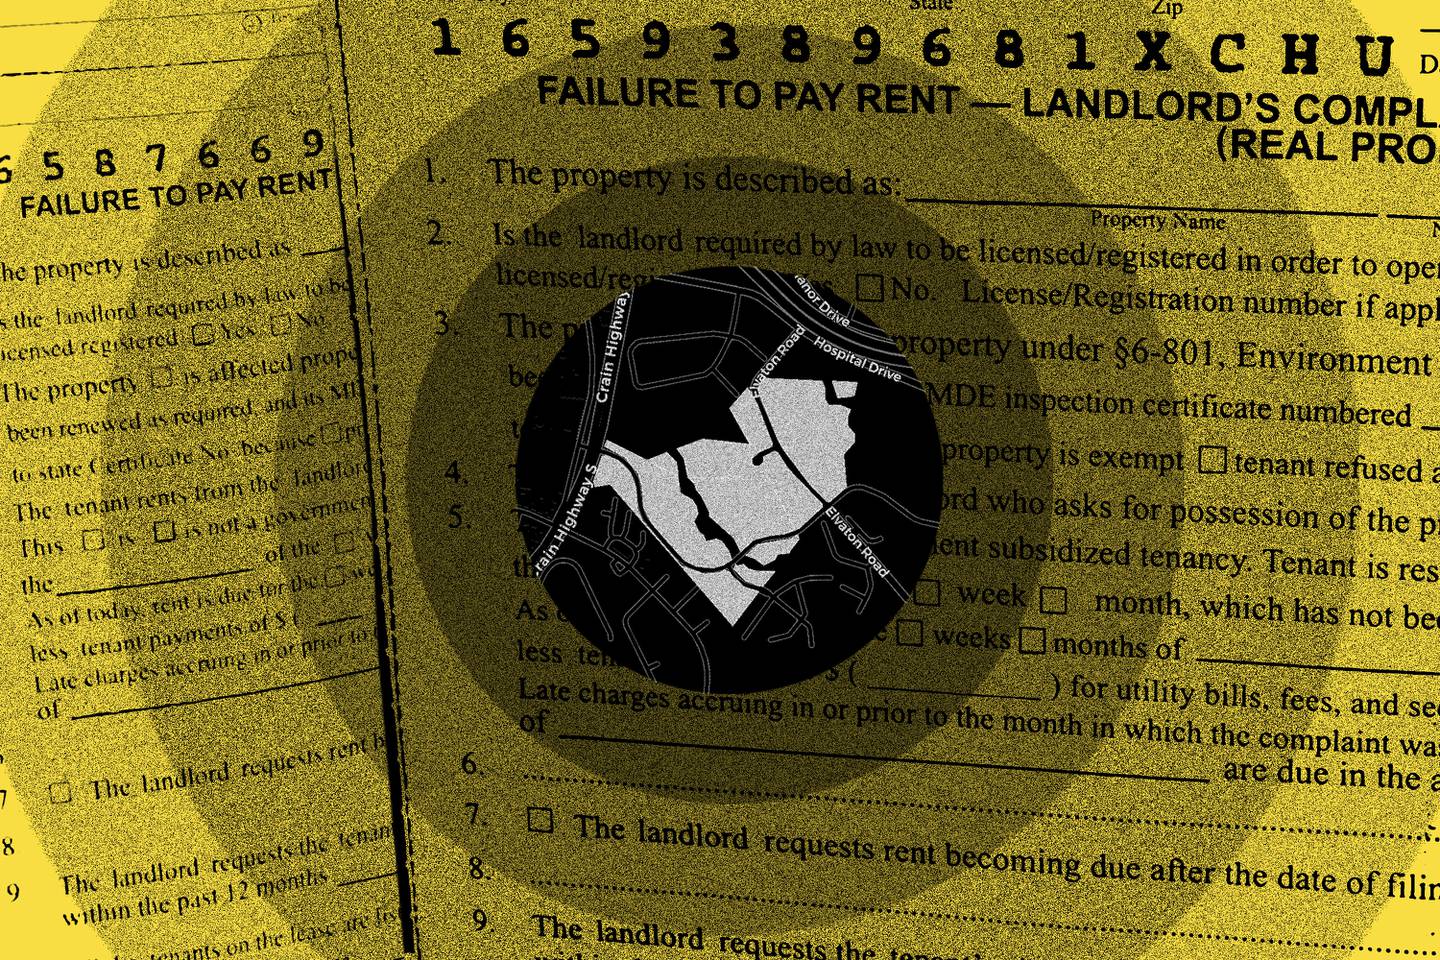 Photo collage showing map of land parcels at center of radiating circles, placed over background of eviction slip labeled “Failure to pay rent.”